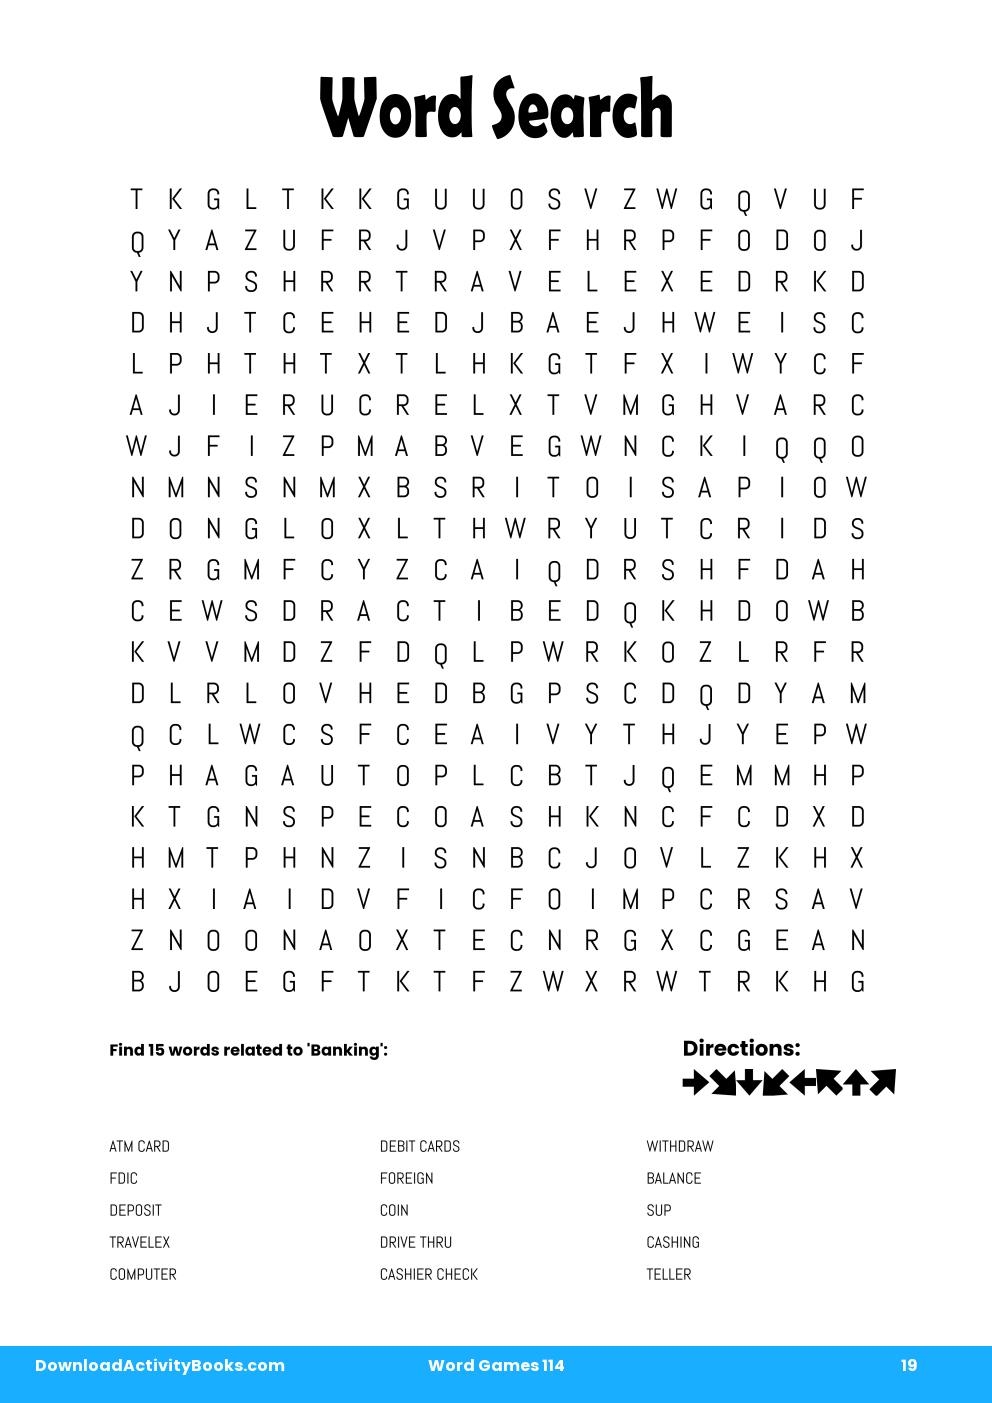 Word Search in Word Games 114